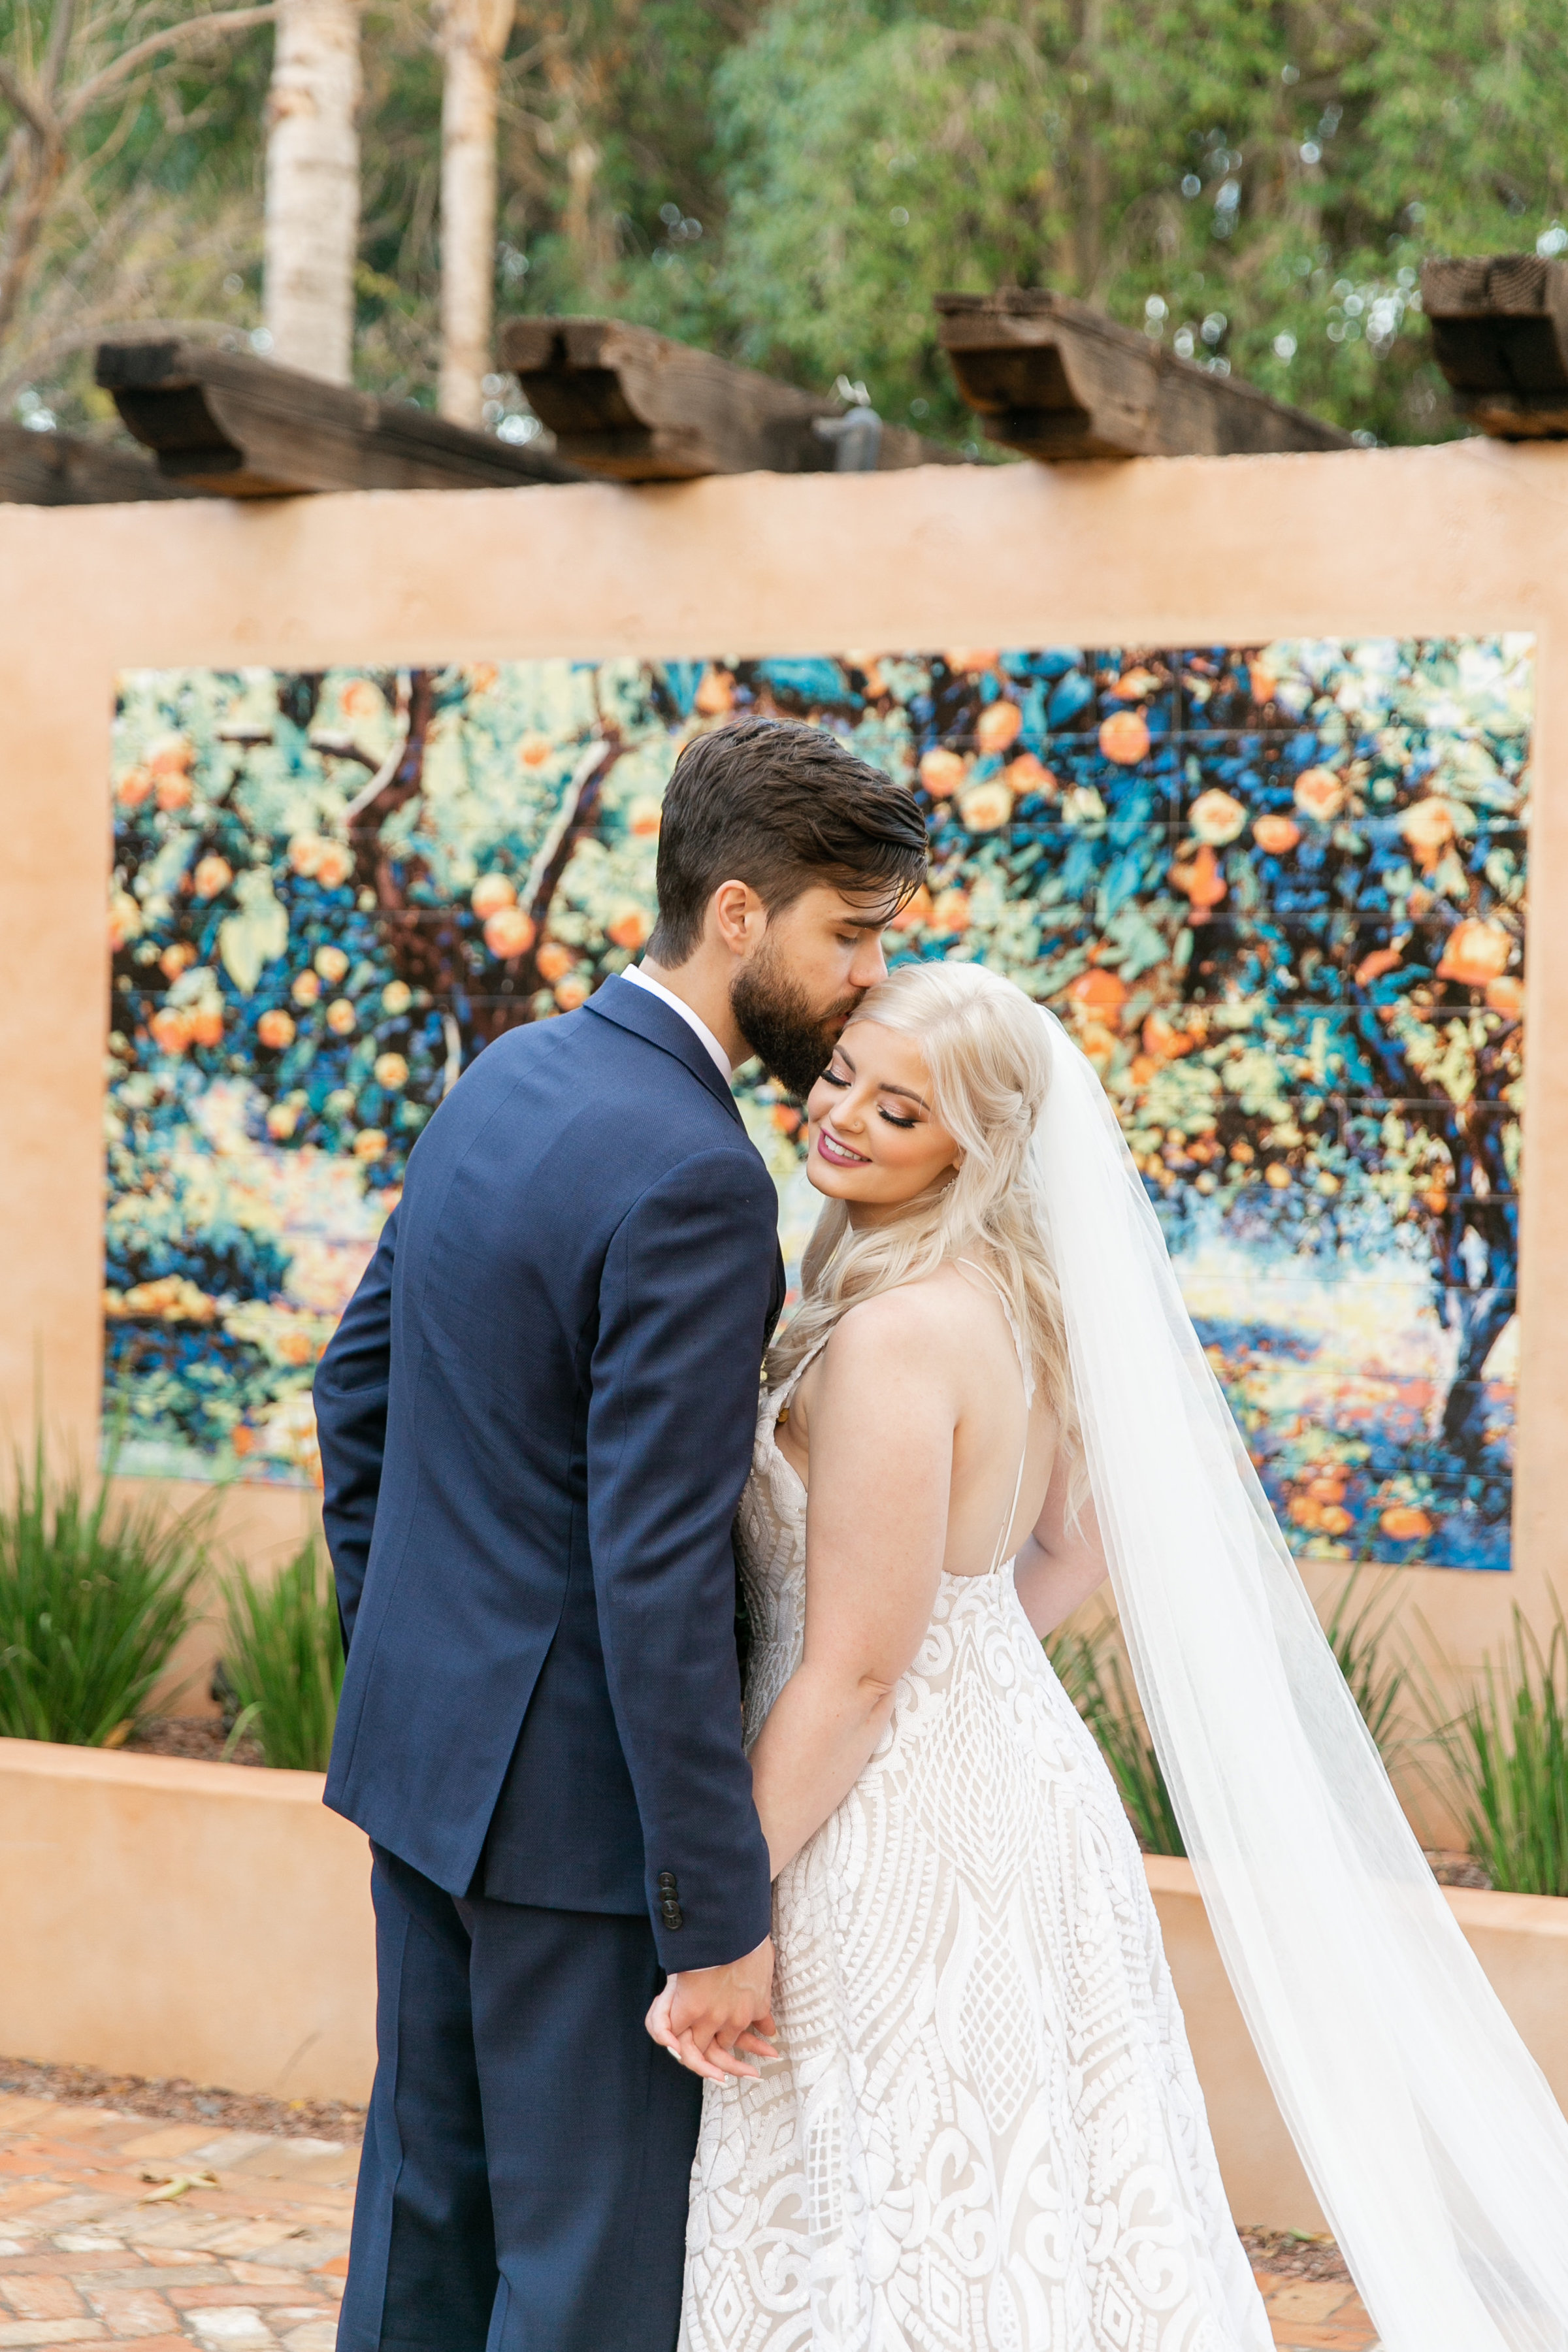 Karlie Colleen Photography - The Royal Palms Wedding - Some Like It Classic - Alex & Sam-525